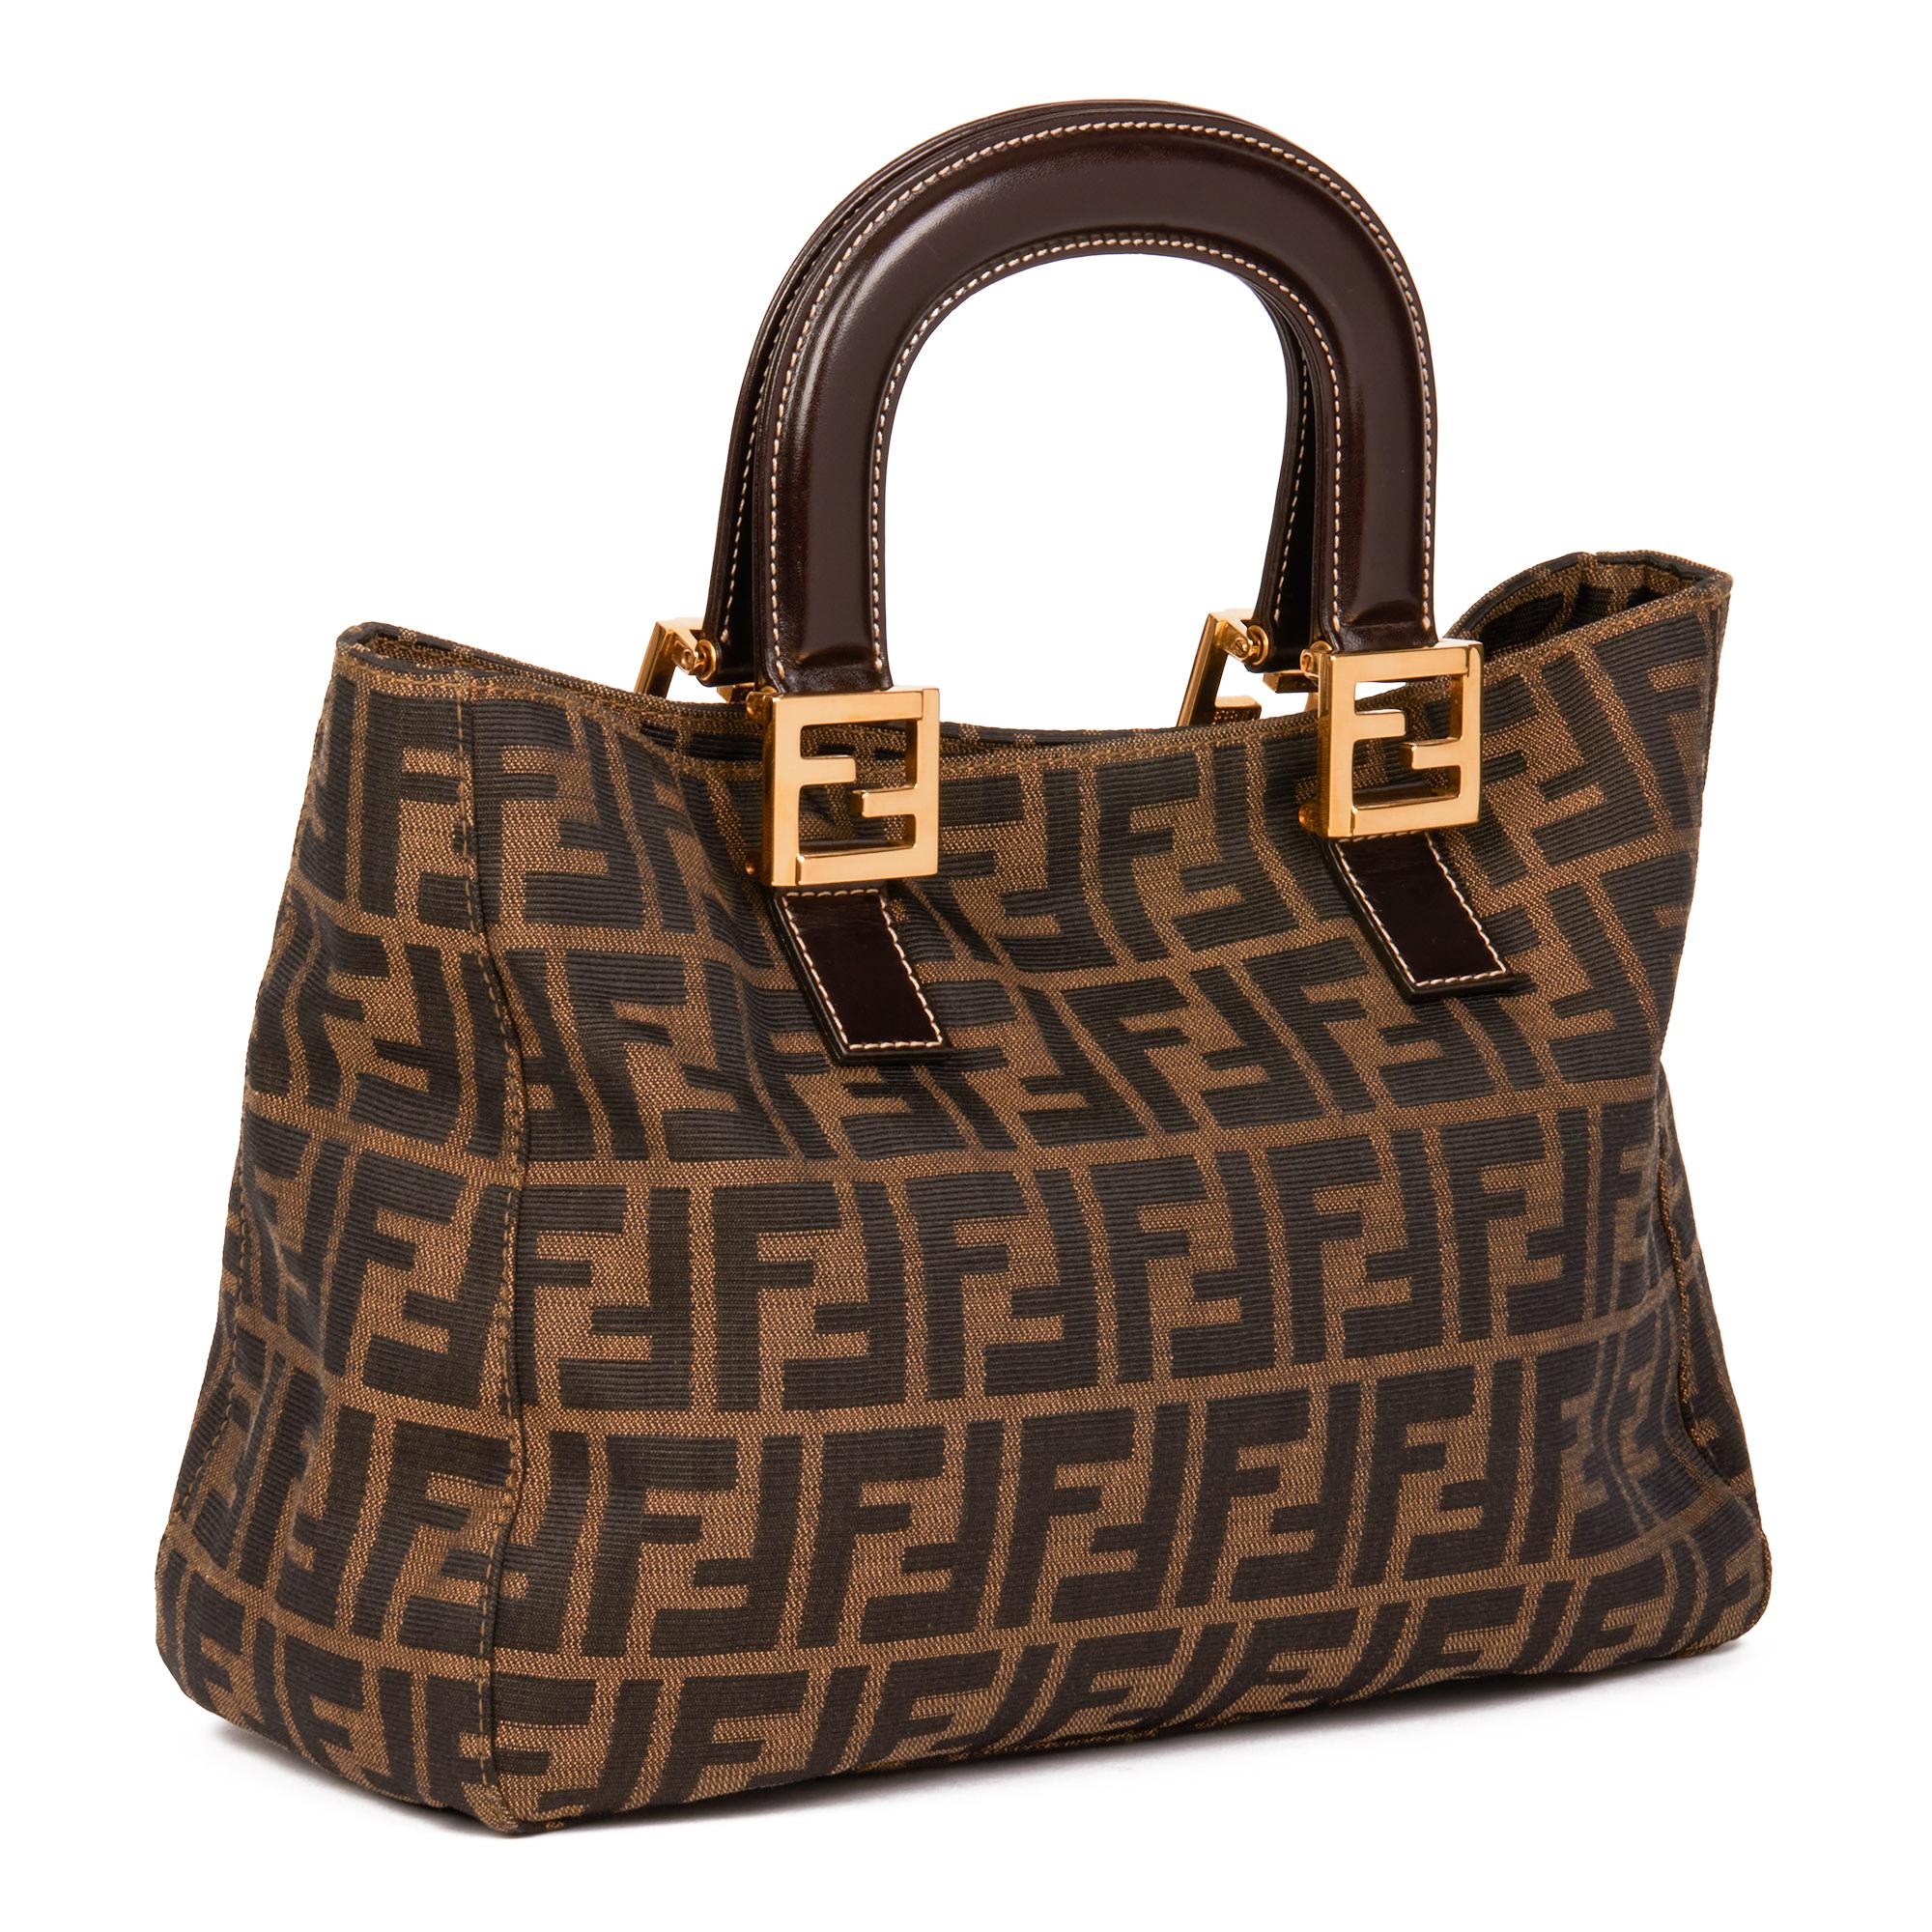 FENDI
Brown Zucca Canvas & Calfskin Leather Vintage Small Tote

Xupes Reference: HB4293
Serial Number: 09263290089
Age (Circa): 2000
Authenticity Details: Date Stamp (Made in Italy)
Gender: Ladies
Type: Tote

Colour: Brown
Hardware: